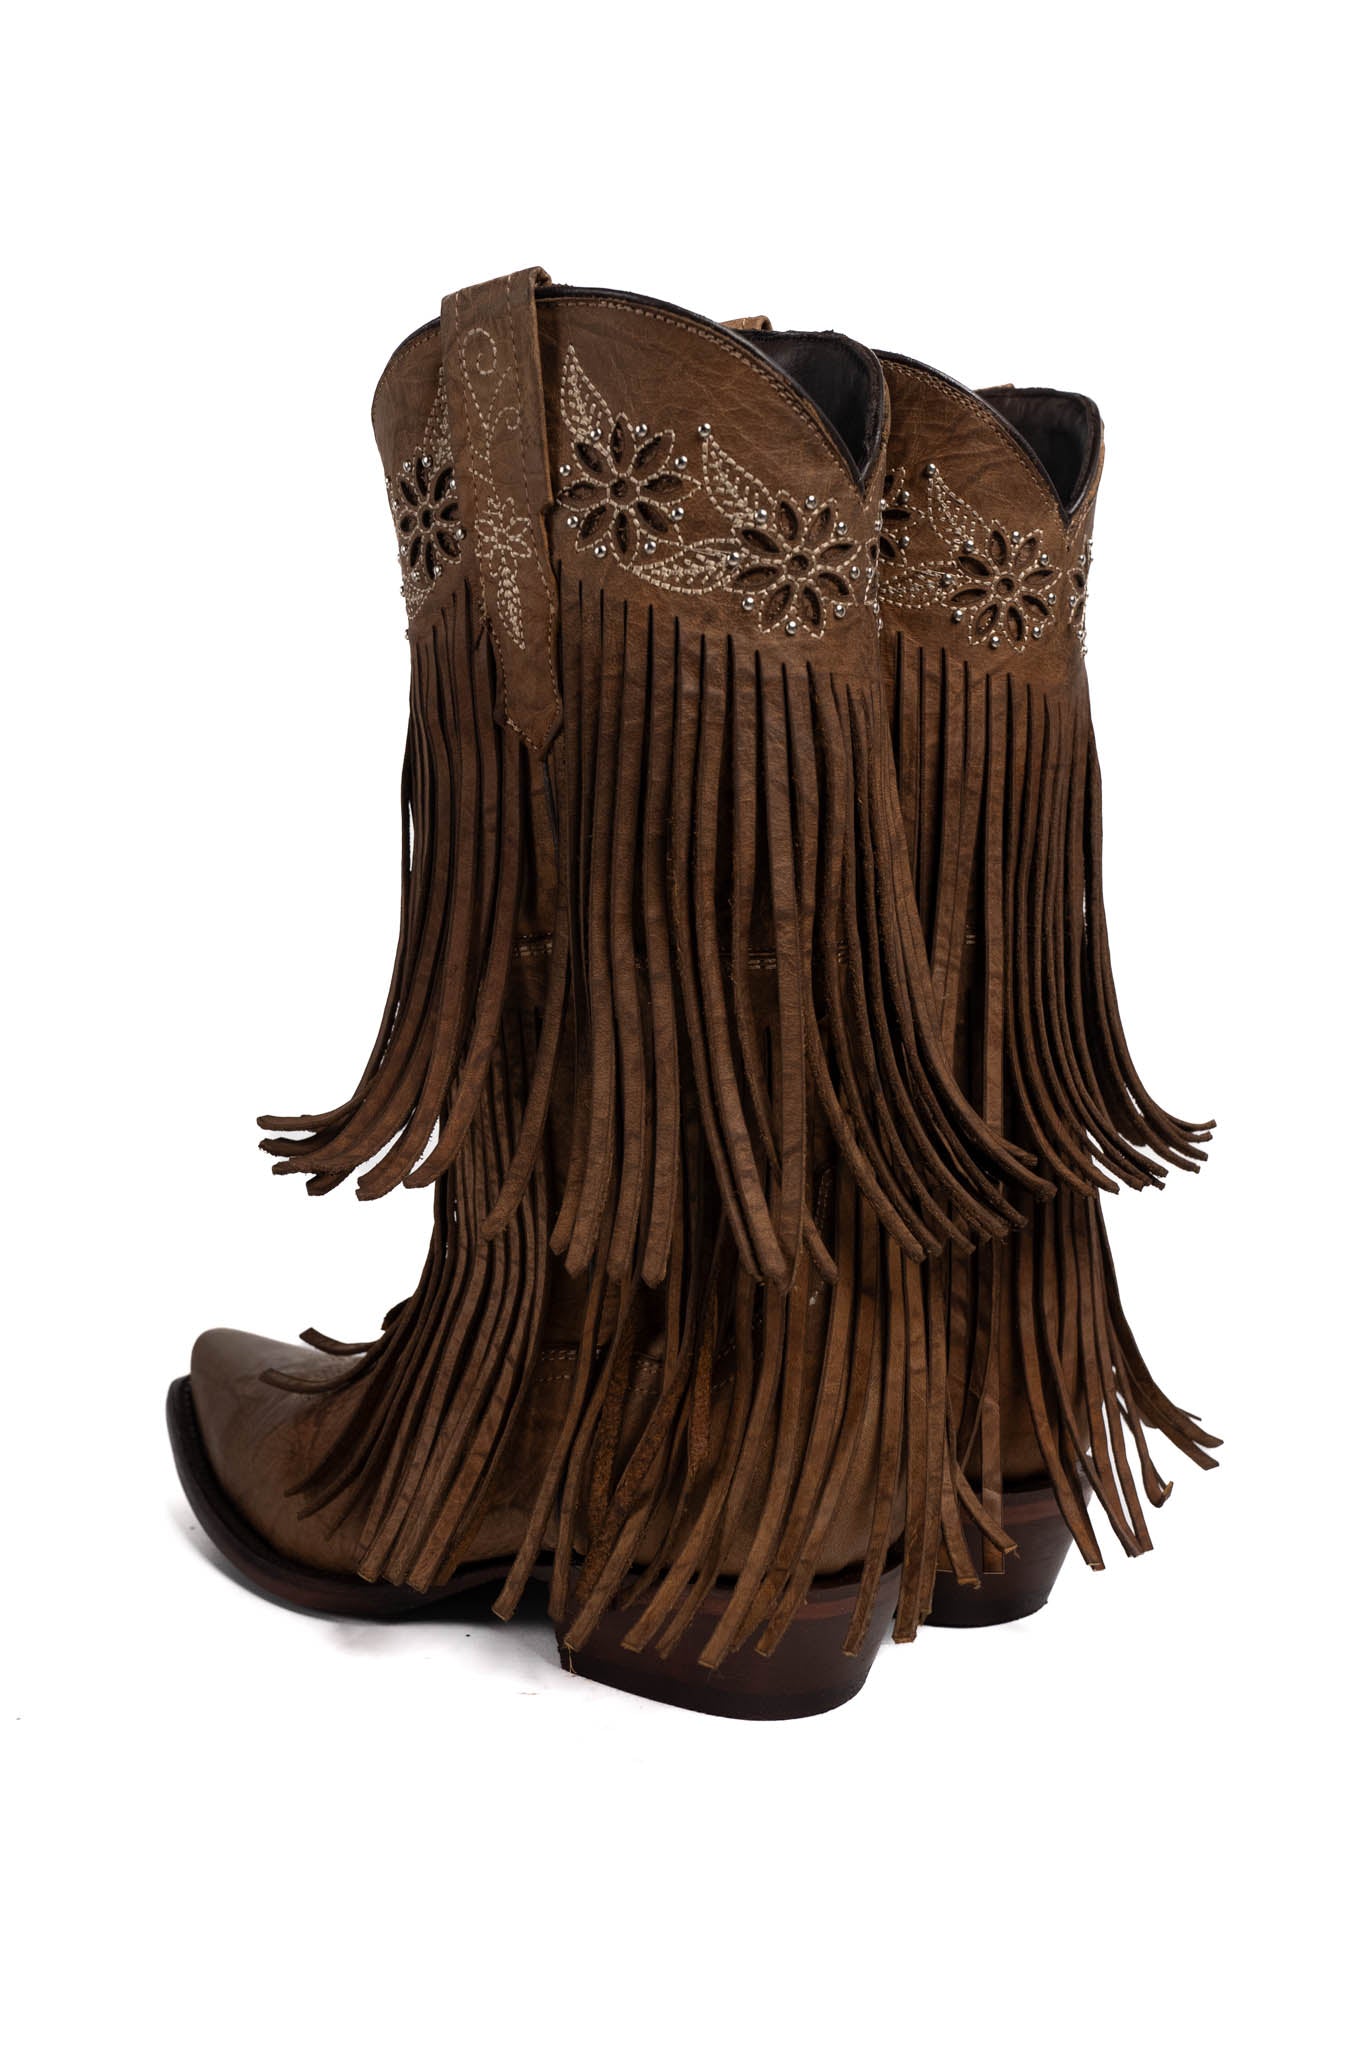 The Barbas Snip Toe Cowgirl Boot